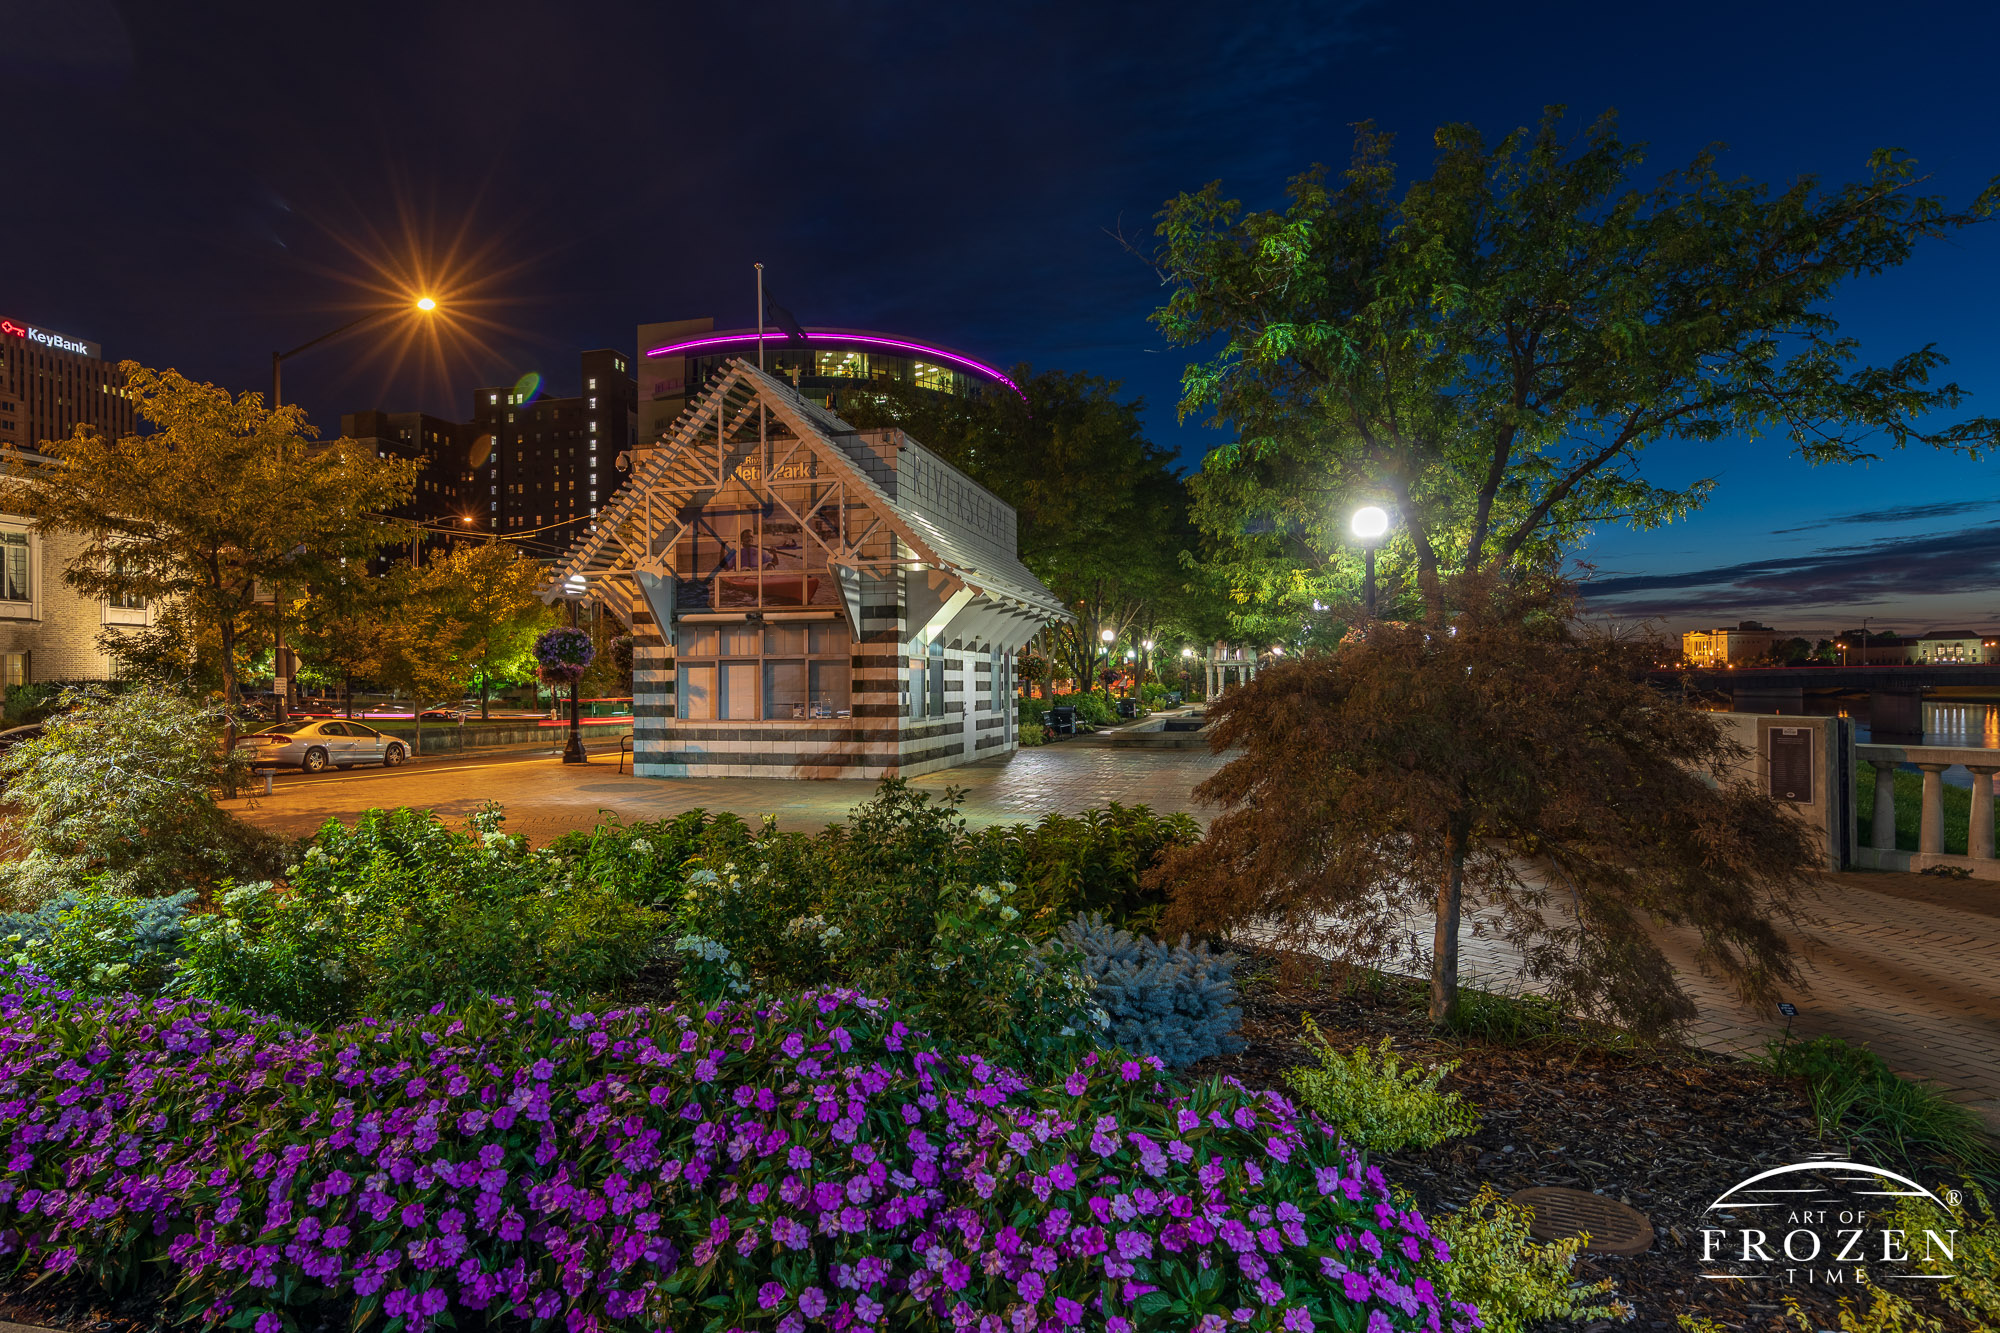 A nightscape scene from RiverScape MetroPark where purple foreground flowers match the background accent light as streetlights warmly illuminate the park plaza